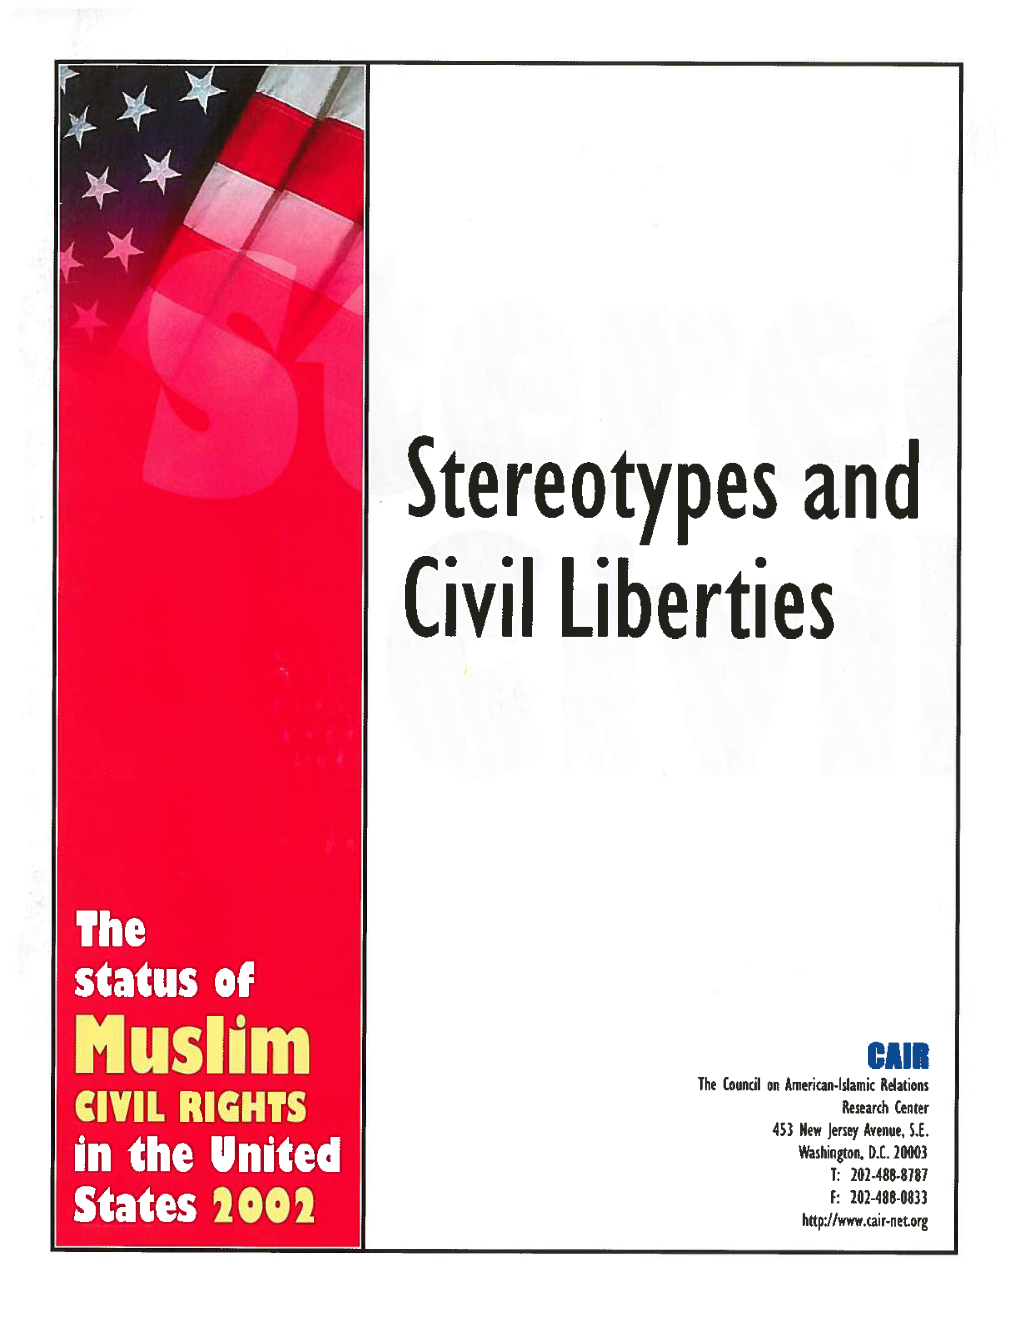 Stereotypes and Civil Liberties